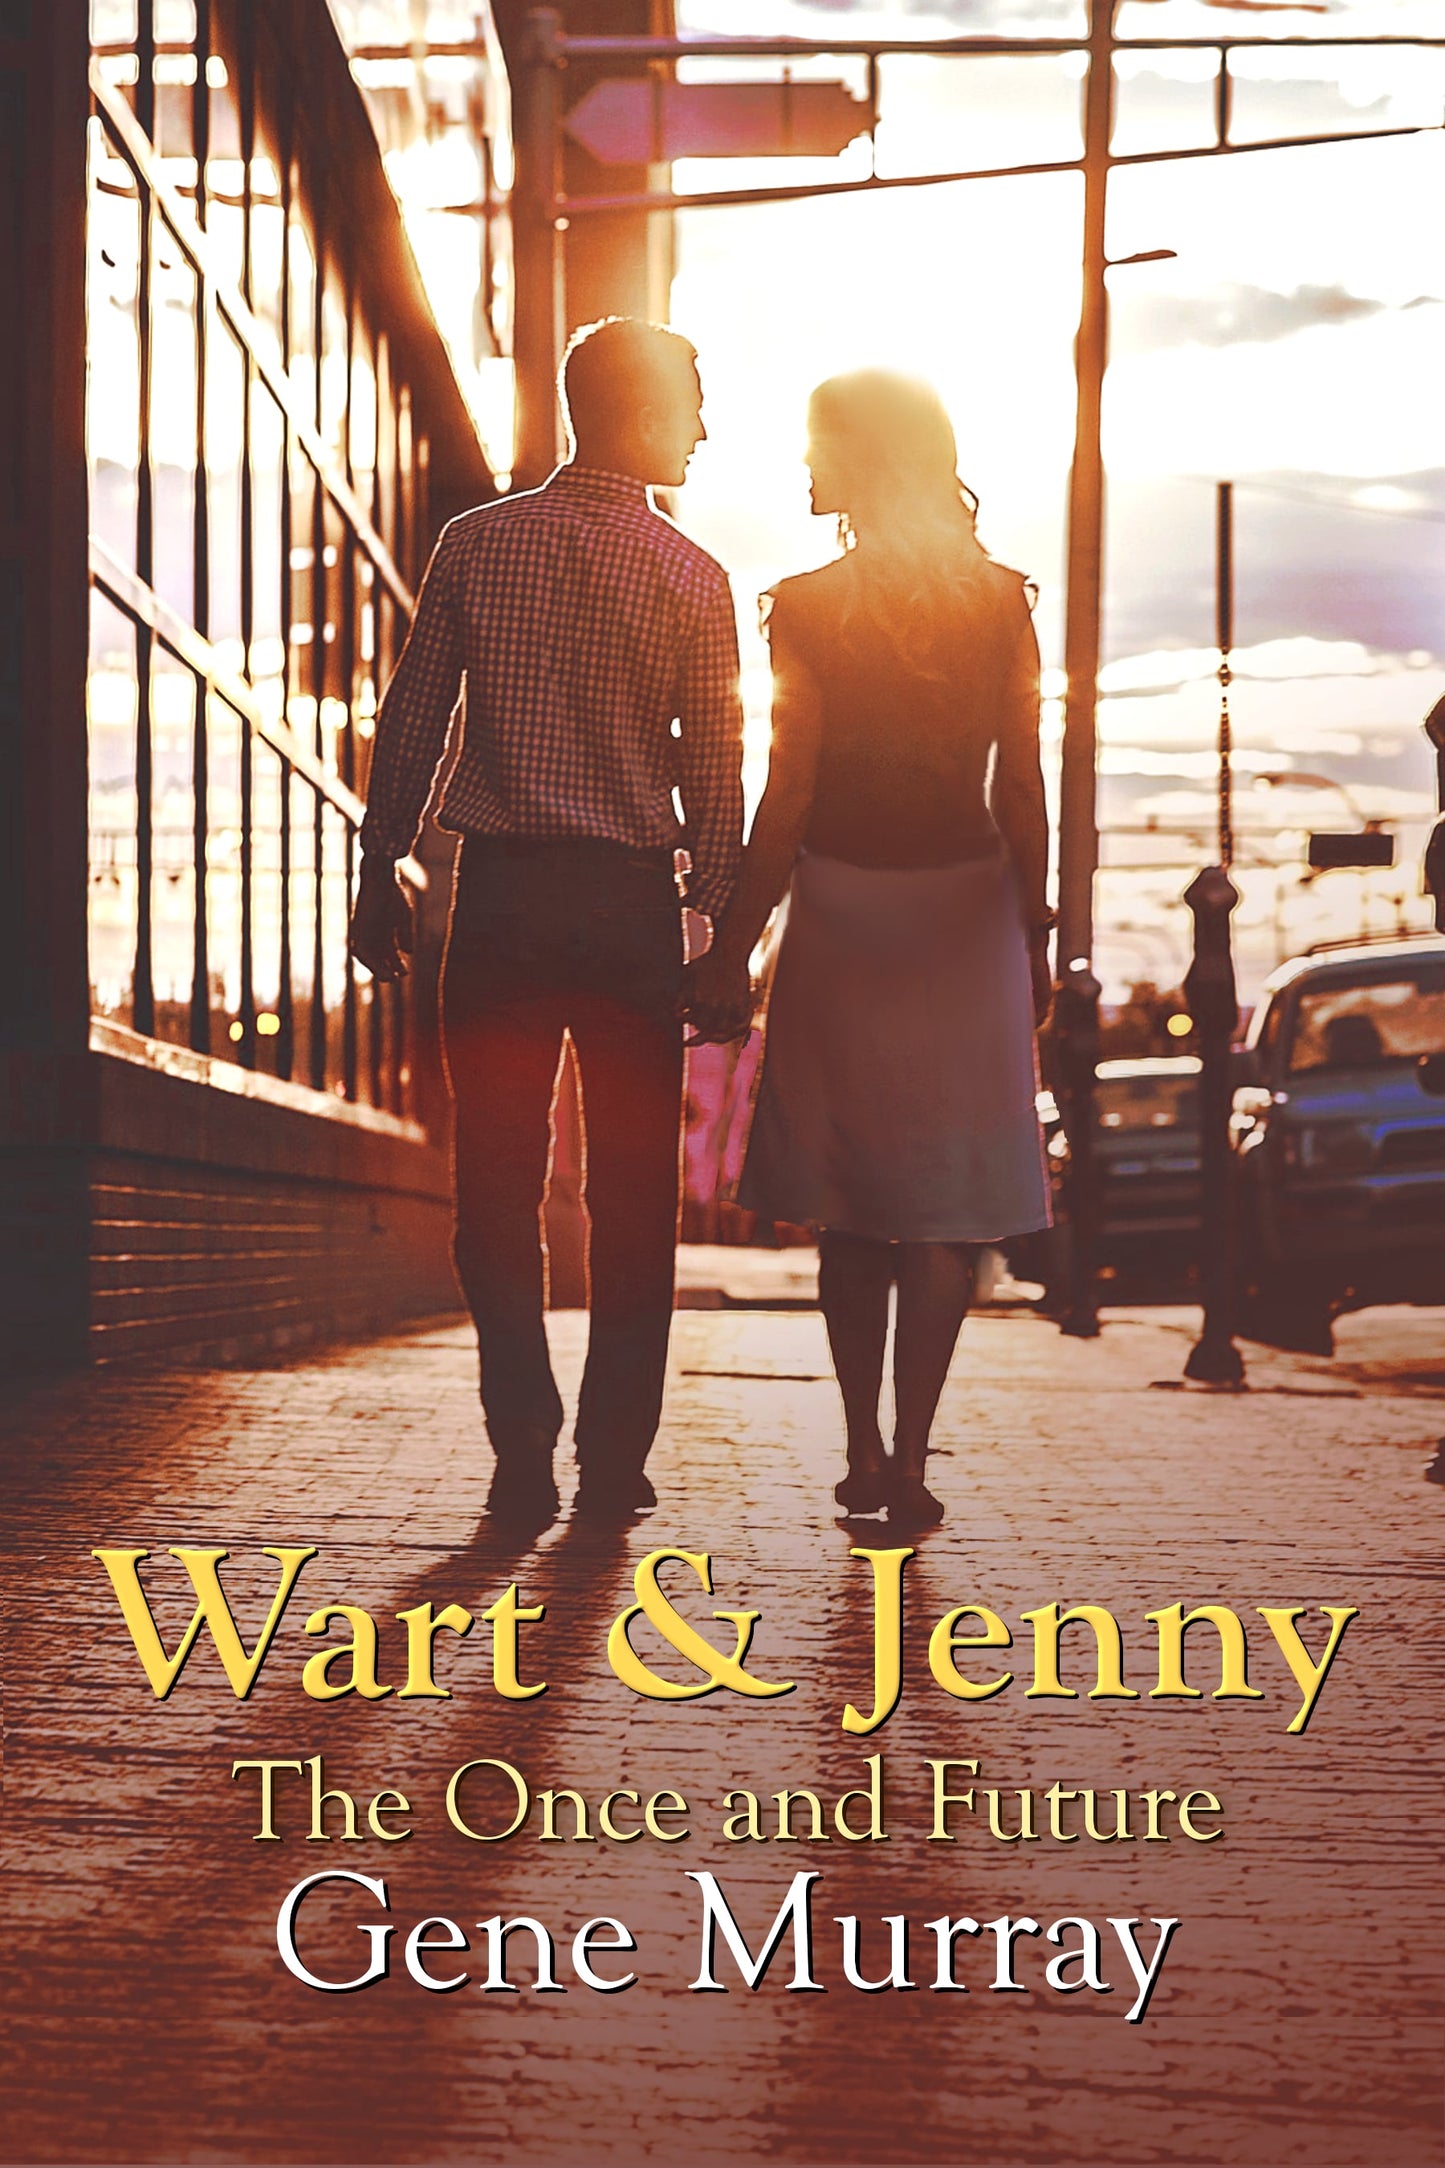 Wart and Jenny: The Once and Future